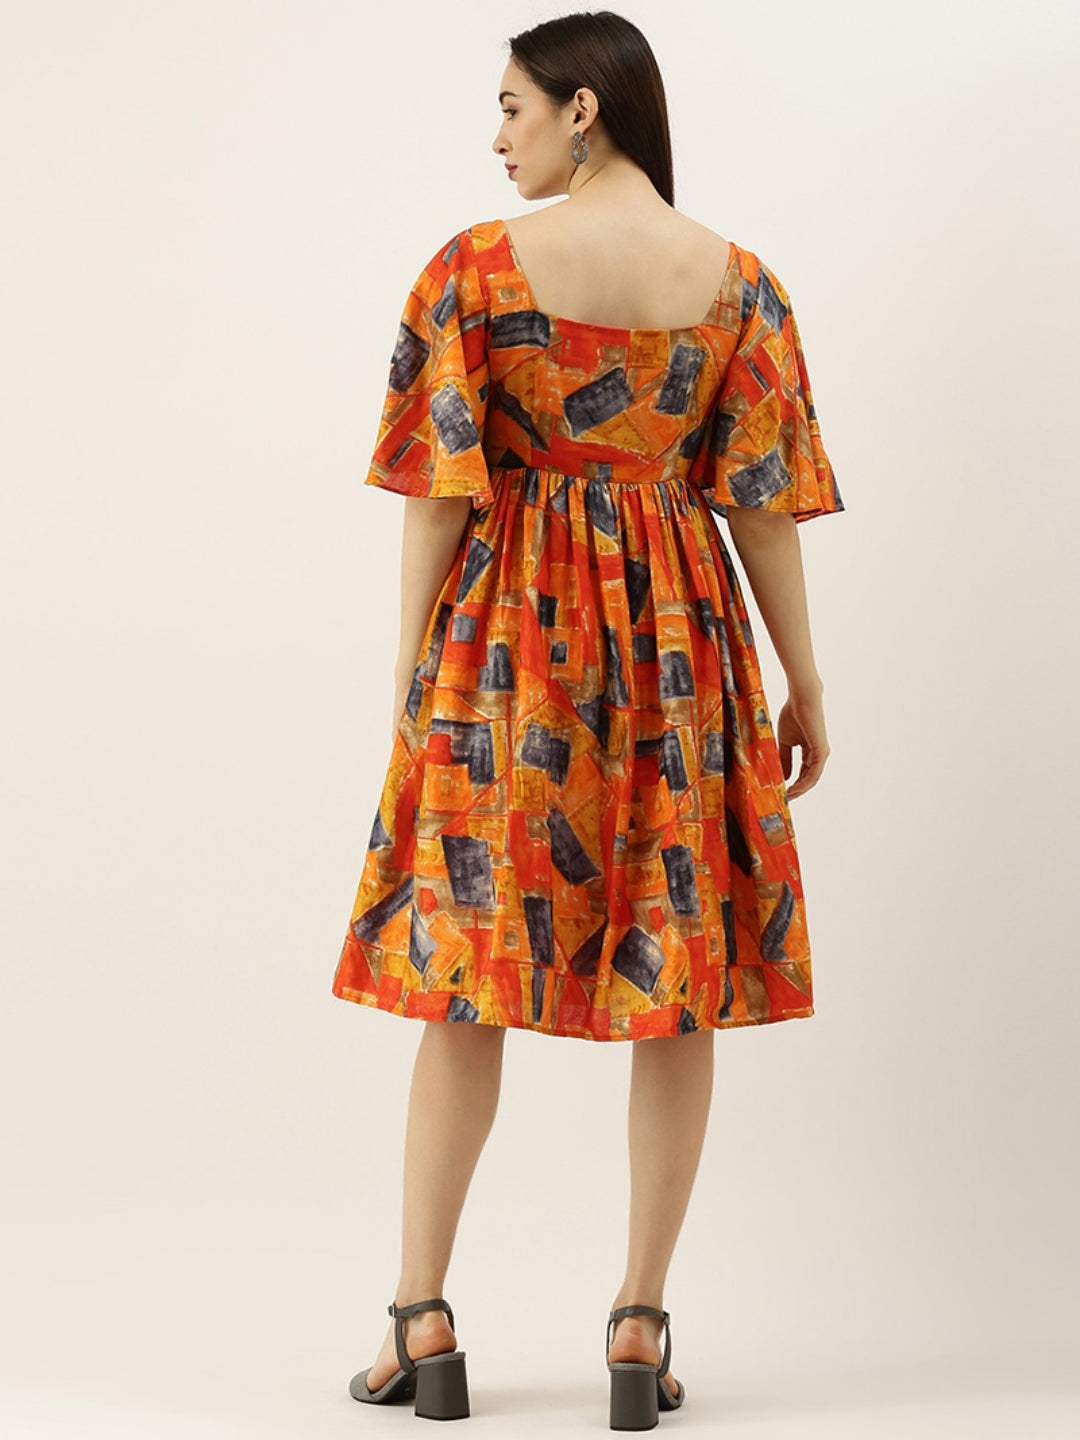 Multicolored-Bell-Sleeve-Dress